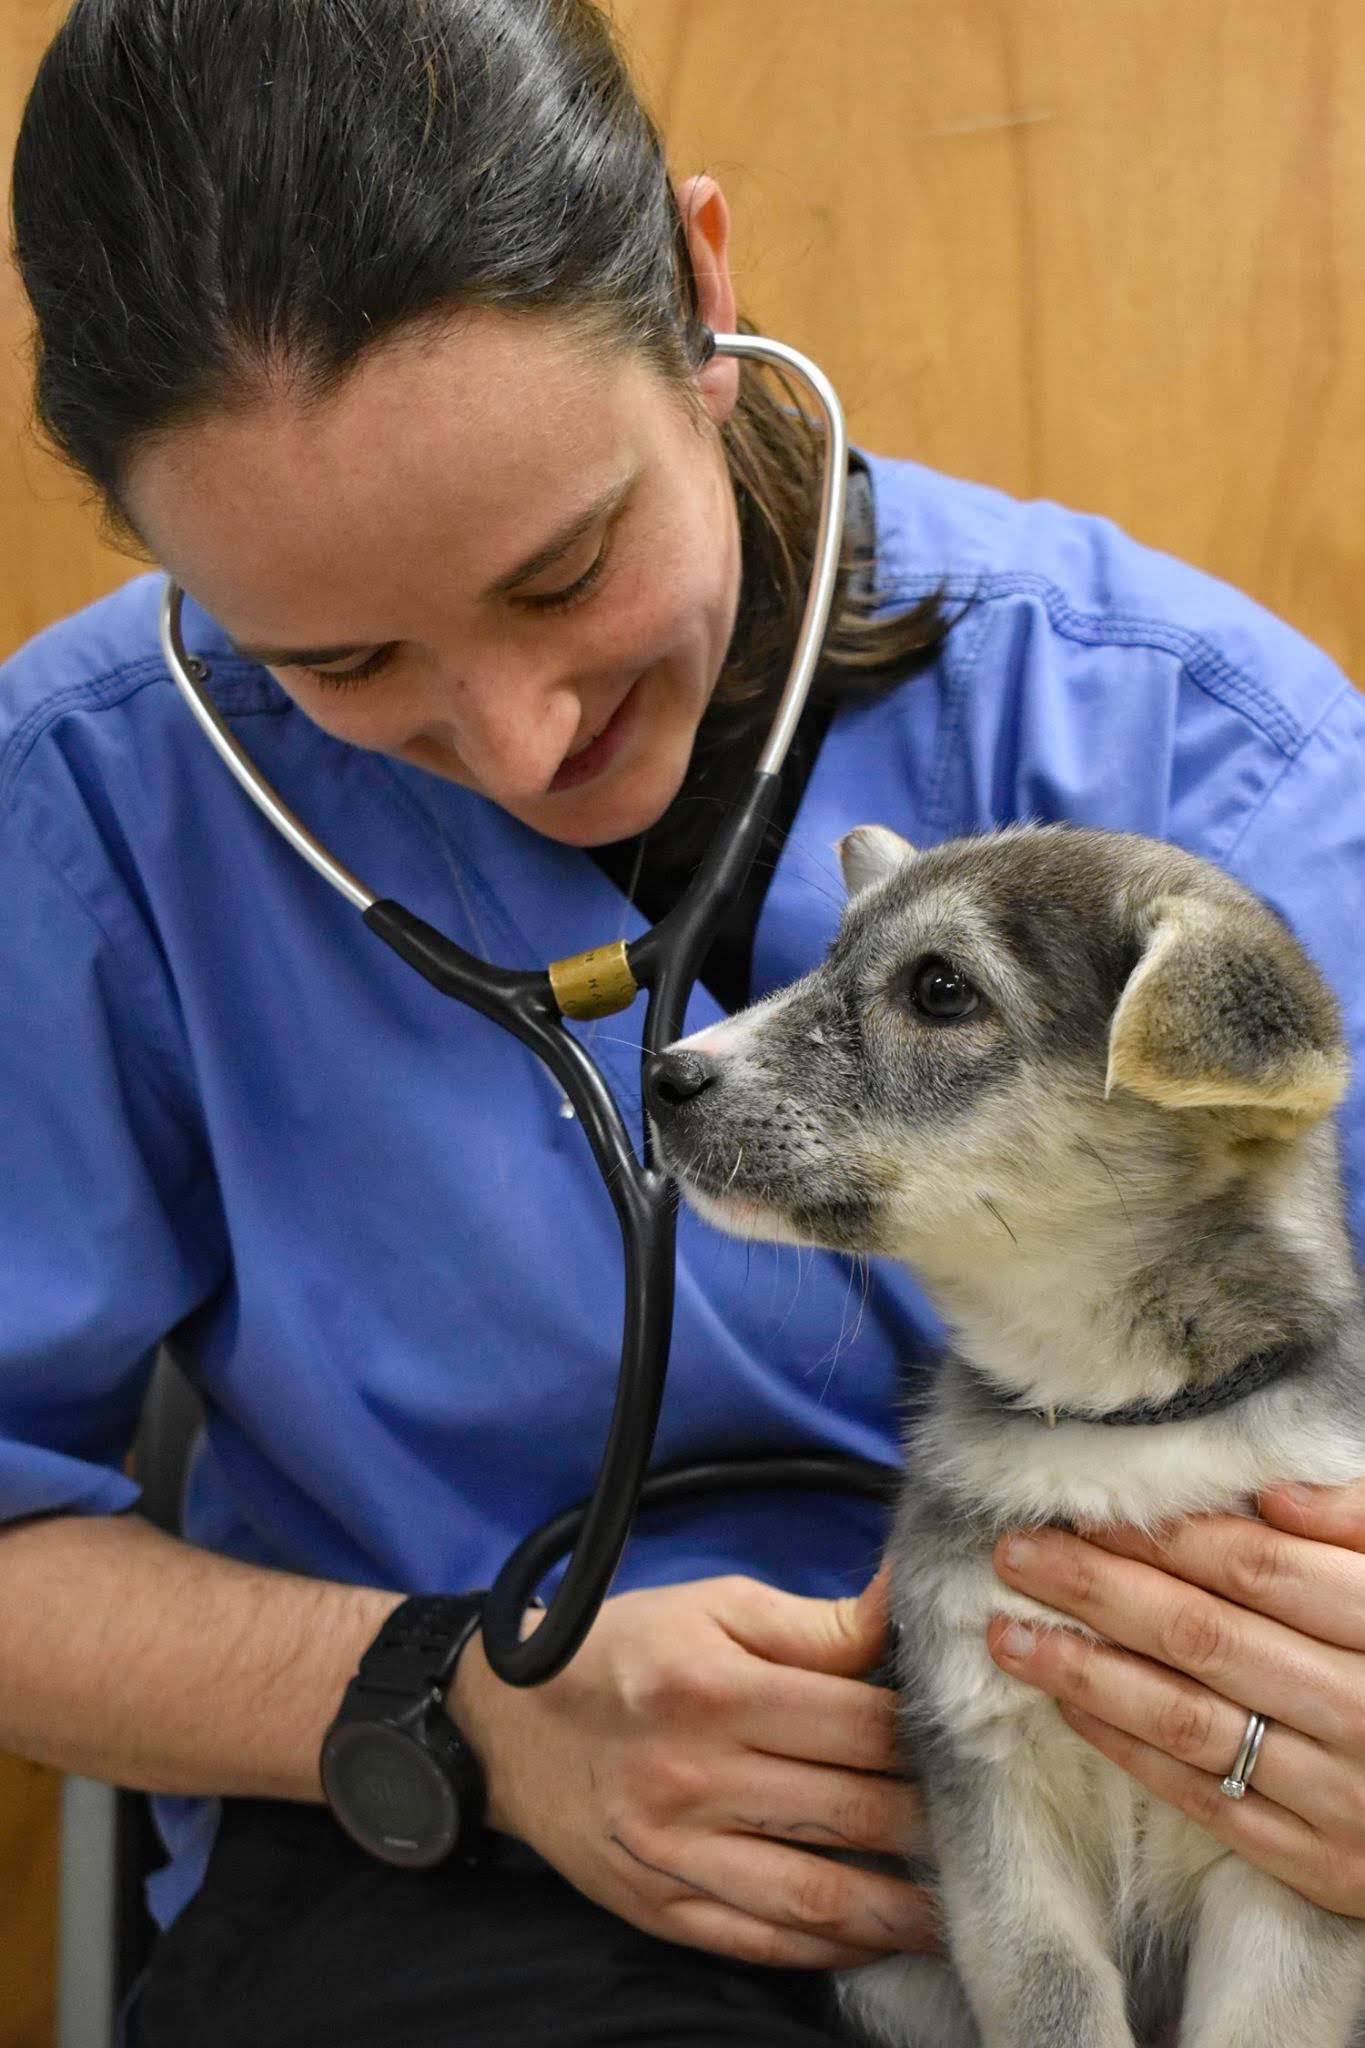 A veterinarian takes care of a dog